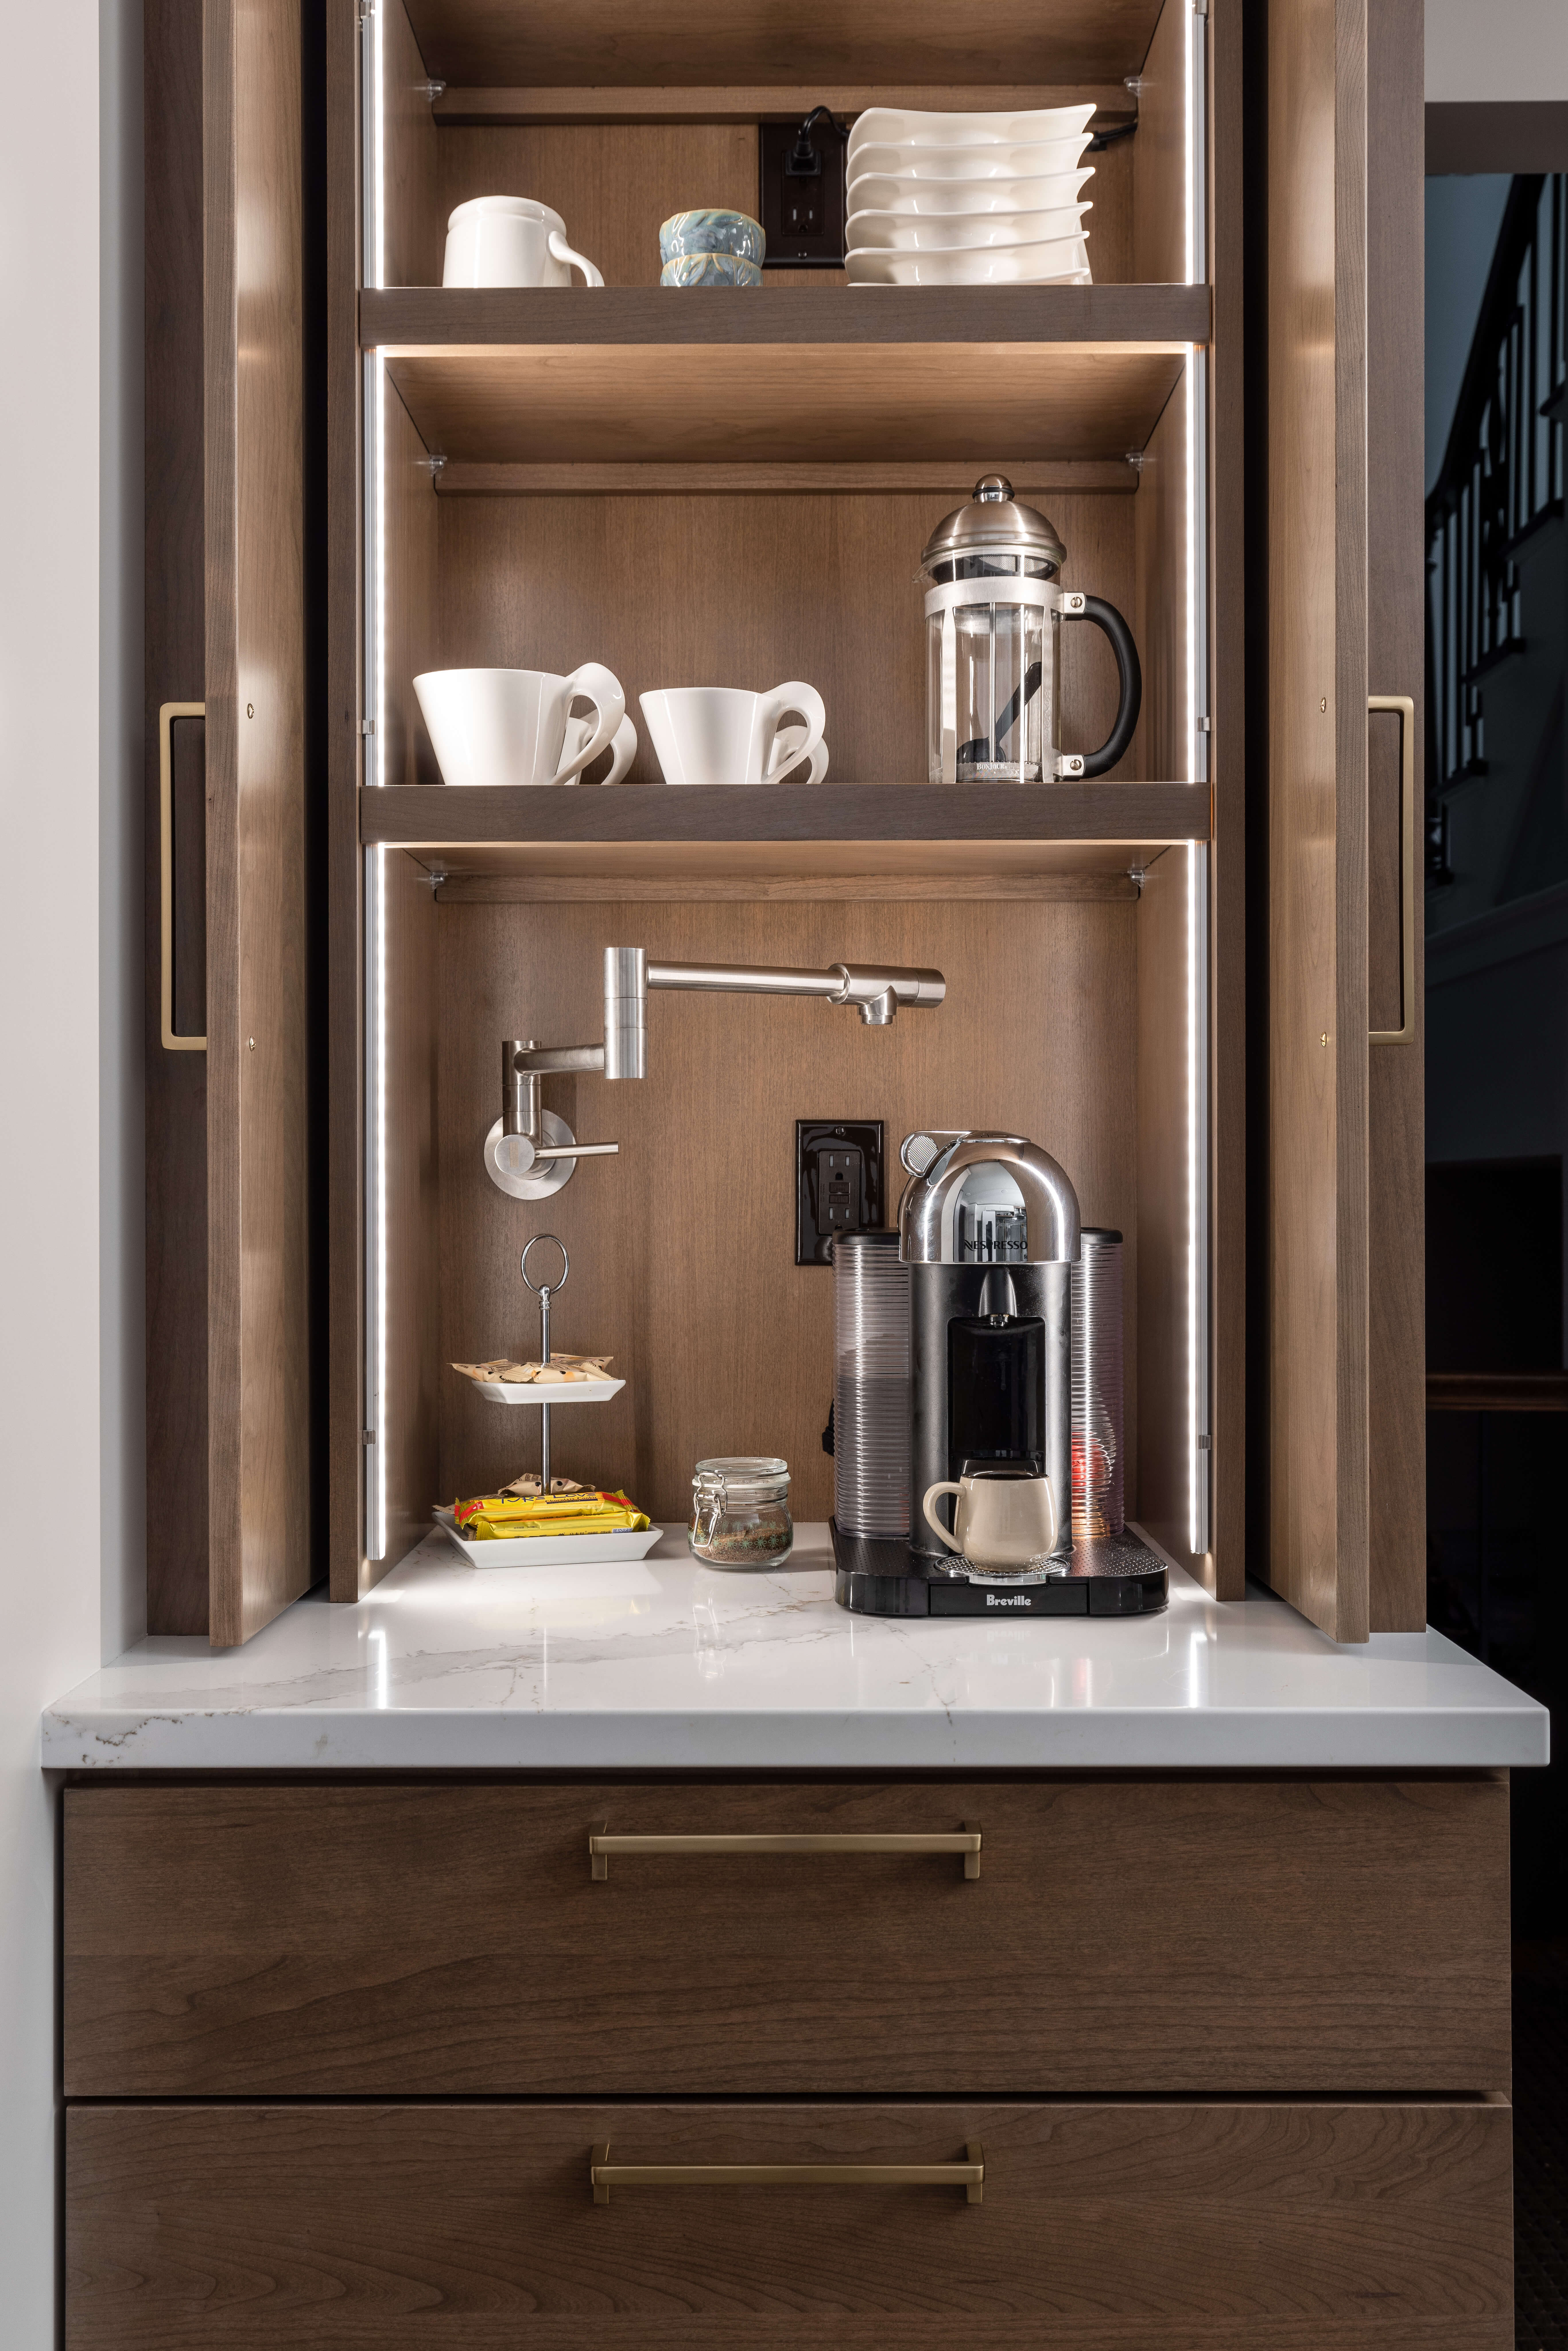 A working pantry and larder cabinet with a pot-filler for the coffee maker to create an easy-to-access coffee station that can be hidden away.